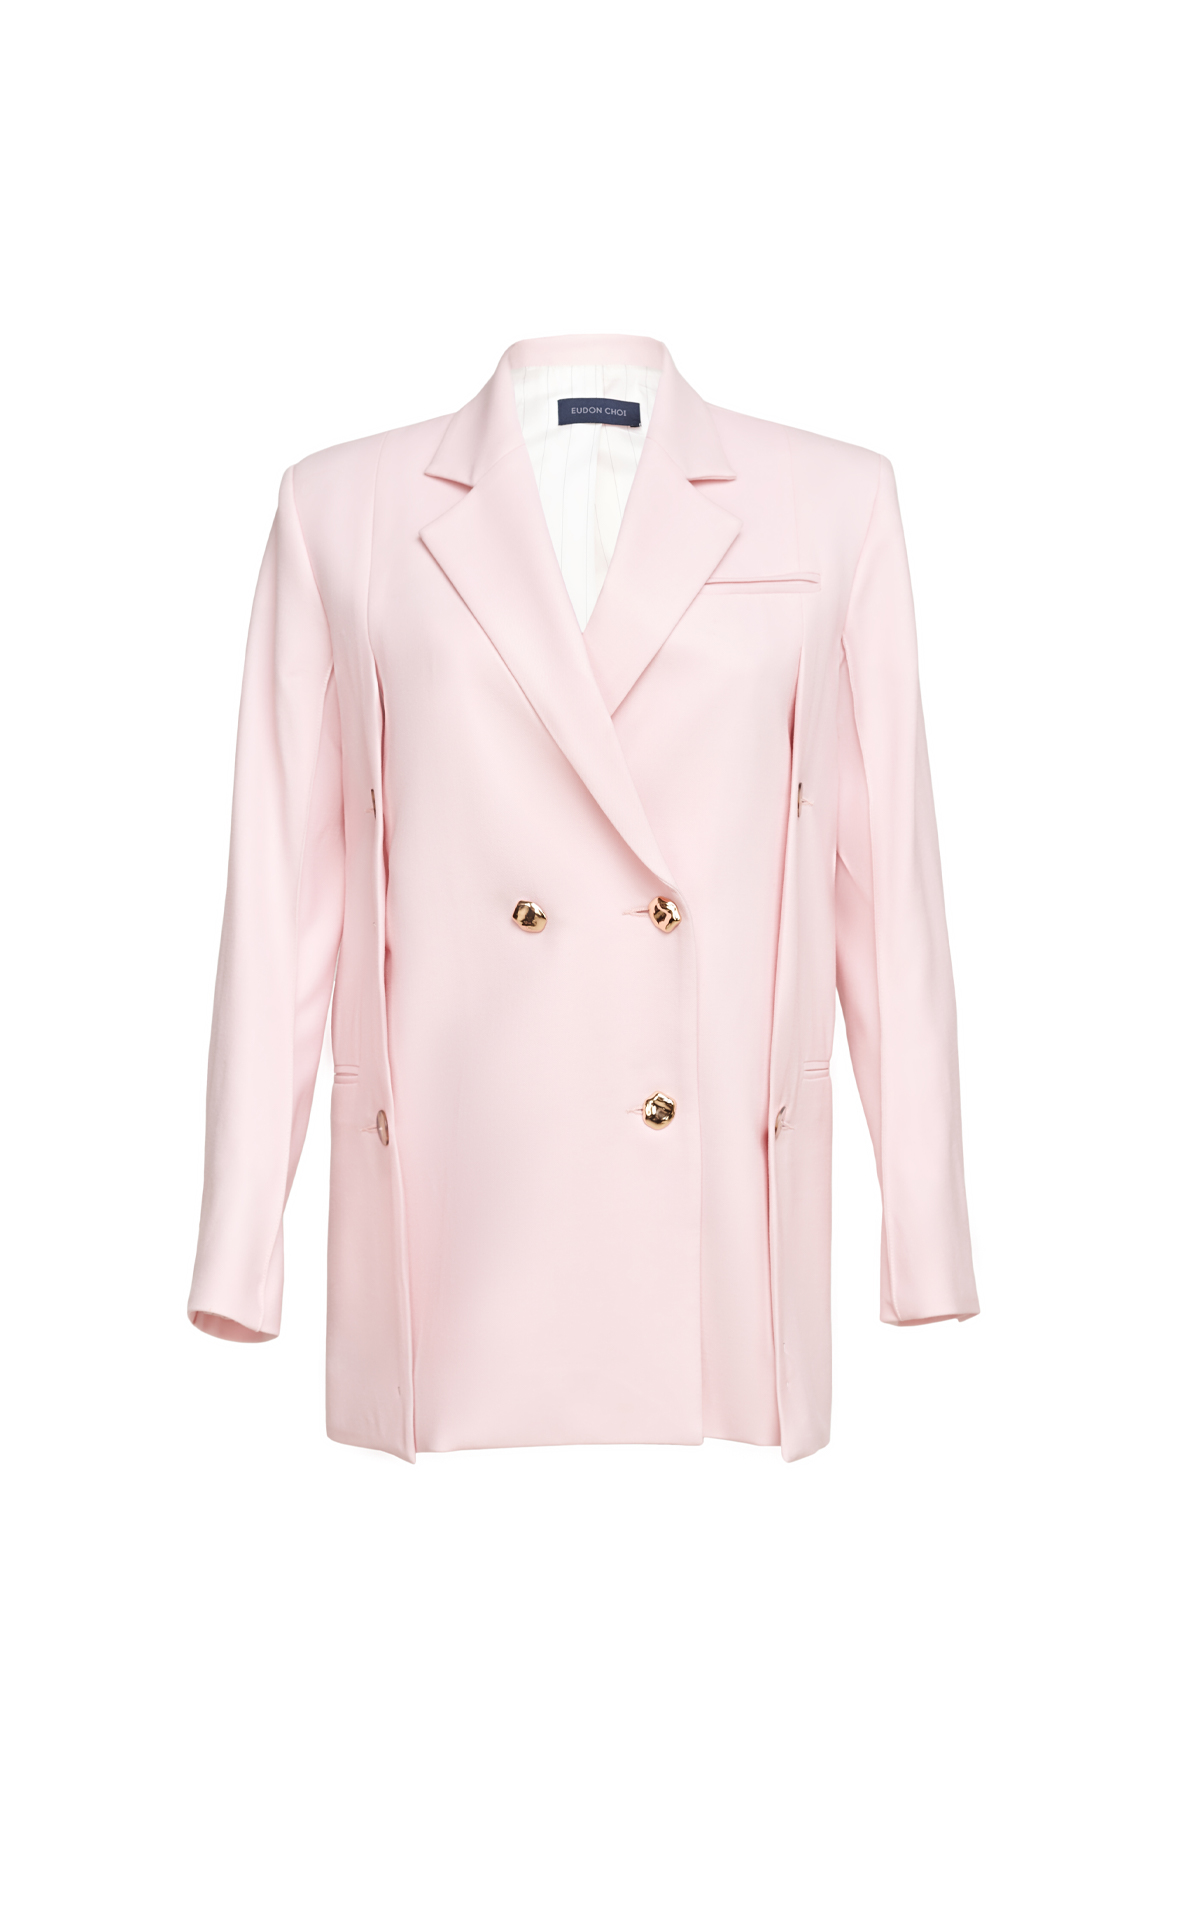 Eudon Choi Beatice jacket pink from Bicester Village